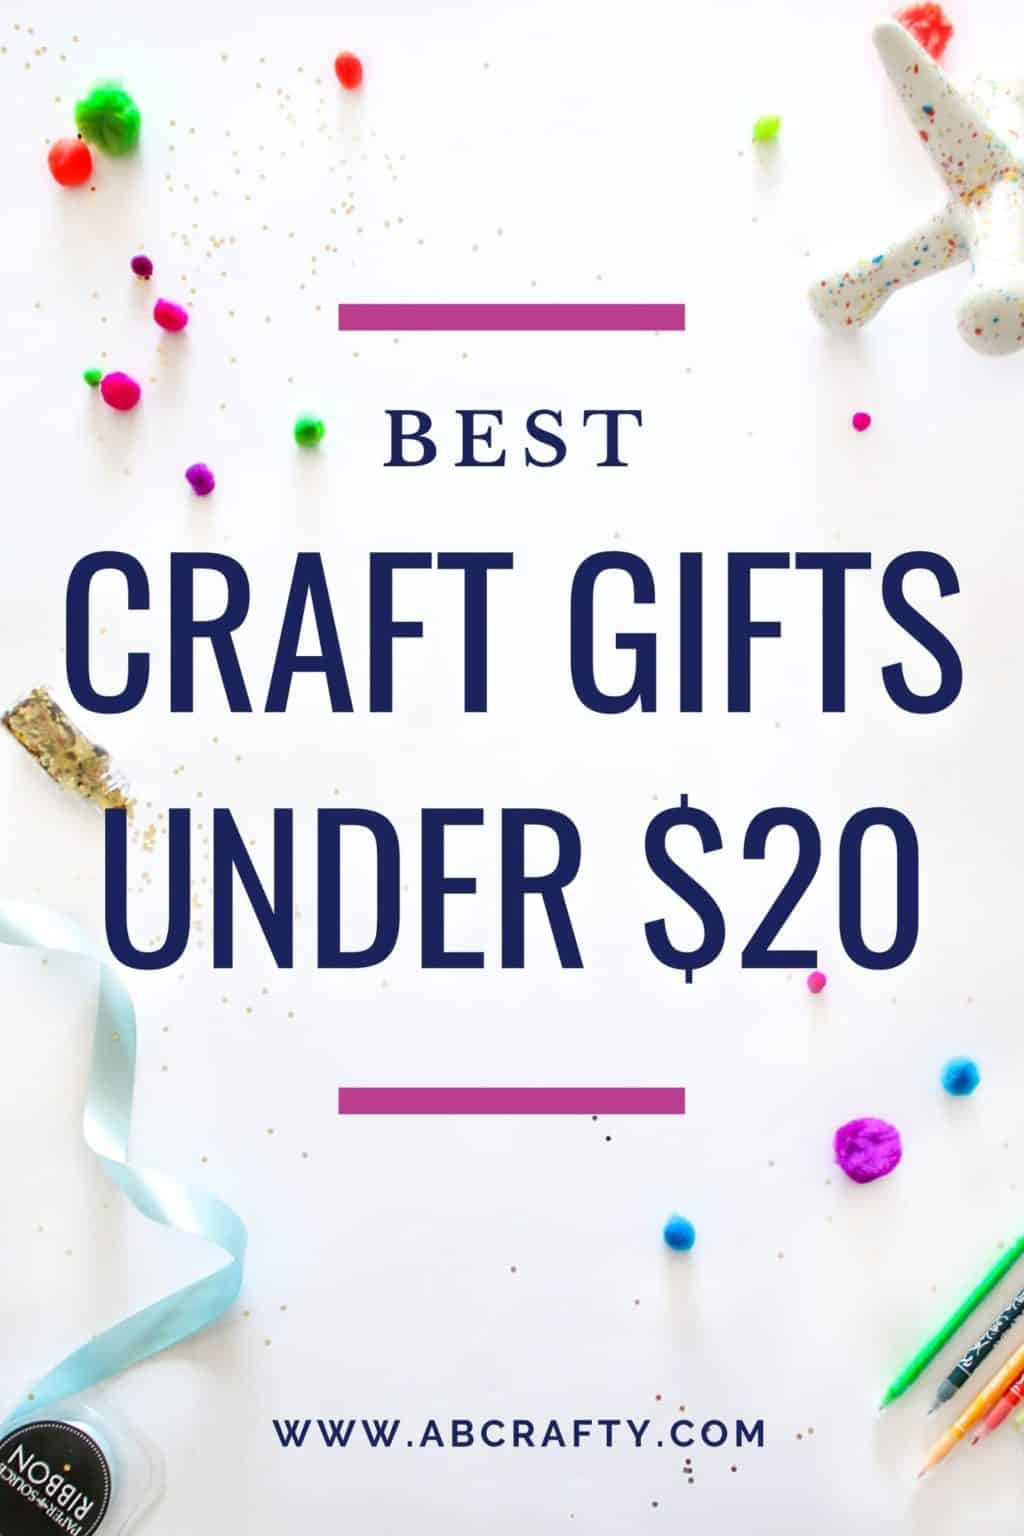 craft supplies with the title "best craft gifts under $20, by abcrafty.com"